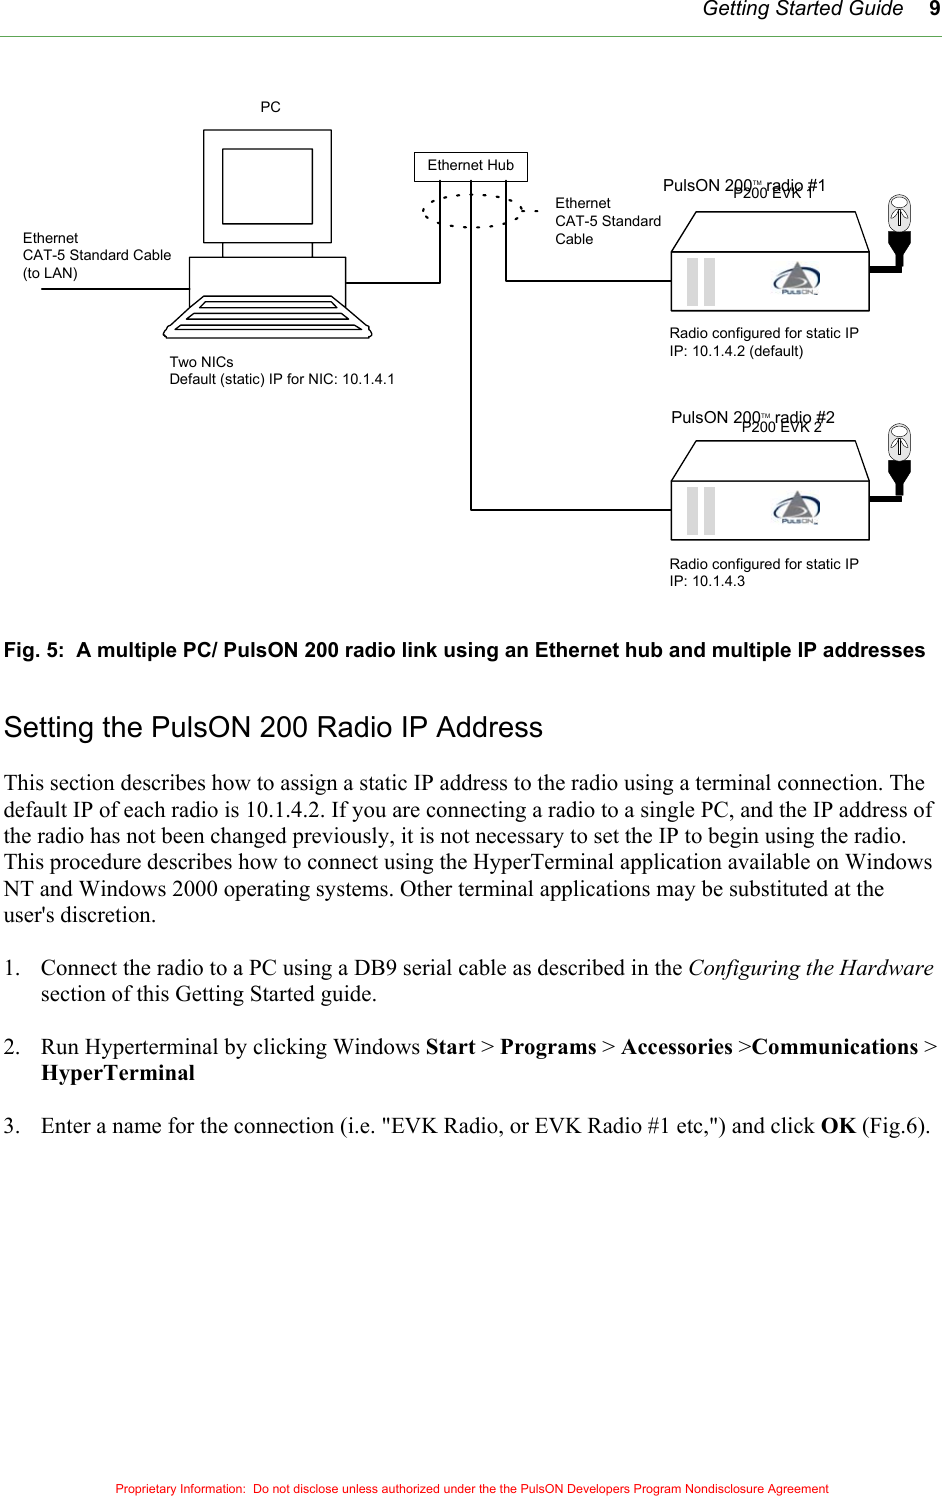   Getting Started Guide 9Ethernet HubEthernetCAT-5 StandardCableP200 EVK 1Two NICsDefault (static) IP for NIC: 10.1.4.1EthernetCAT-5 Standard Cable(to LAN)P200 EVK 2Radio configured for static IPIP: 10.1.4.2 (default)Radio configured for static IPIP: 10.1.4.3PCPulsON 200TM radio #1 PulsON 200TM radio #2   Fig. 5:  A multiple PC/ PulsON 200 radio link using an Ethernet hub and multiple IP addresses Setting the PulsON 200 Radio IP Address  This section describes how to assign a static IP address to the radio using a terminal connection. The default IP of each radio is 10.1.4.2. If you are connecting a radio to a single PC, and the IP address of the radio has not been changed previously, it is not necessary to set the IP to begin using the radio. This procedure describes how to connect using the HyperTerminal application available on Windows NT and Windows 2000 operating systems. Other terminal applications may be substituted at the user&apos;s discretion.  1.  Connect the radio to a PC using a DB9 serial cable as described in the Configuring the Hardware section of this Getting Started guide.  2.  Run Hyperterminal by clicking Windows Start &gt; Programs &gt; Accessories &gt;Communications &gt; HyperTerminal  3.  Enter a name for the connection (i.e. &quot;EVK Radio, or EVK Radio #1 etc,&quot;) and click OK (Fig.6).  Proprietary Information:  Do not disclose unless authorized under the the PulsON Developers Program Nondisclosure Agreement 